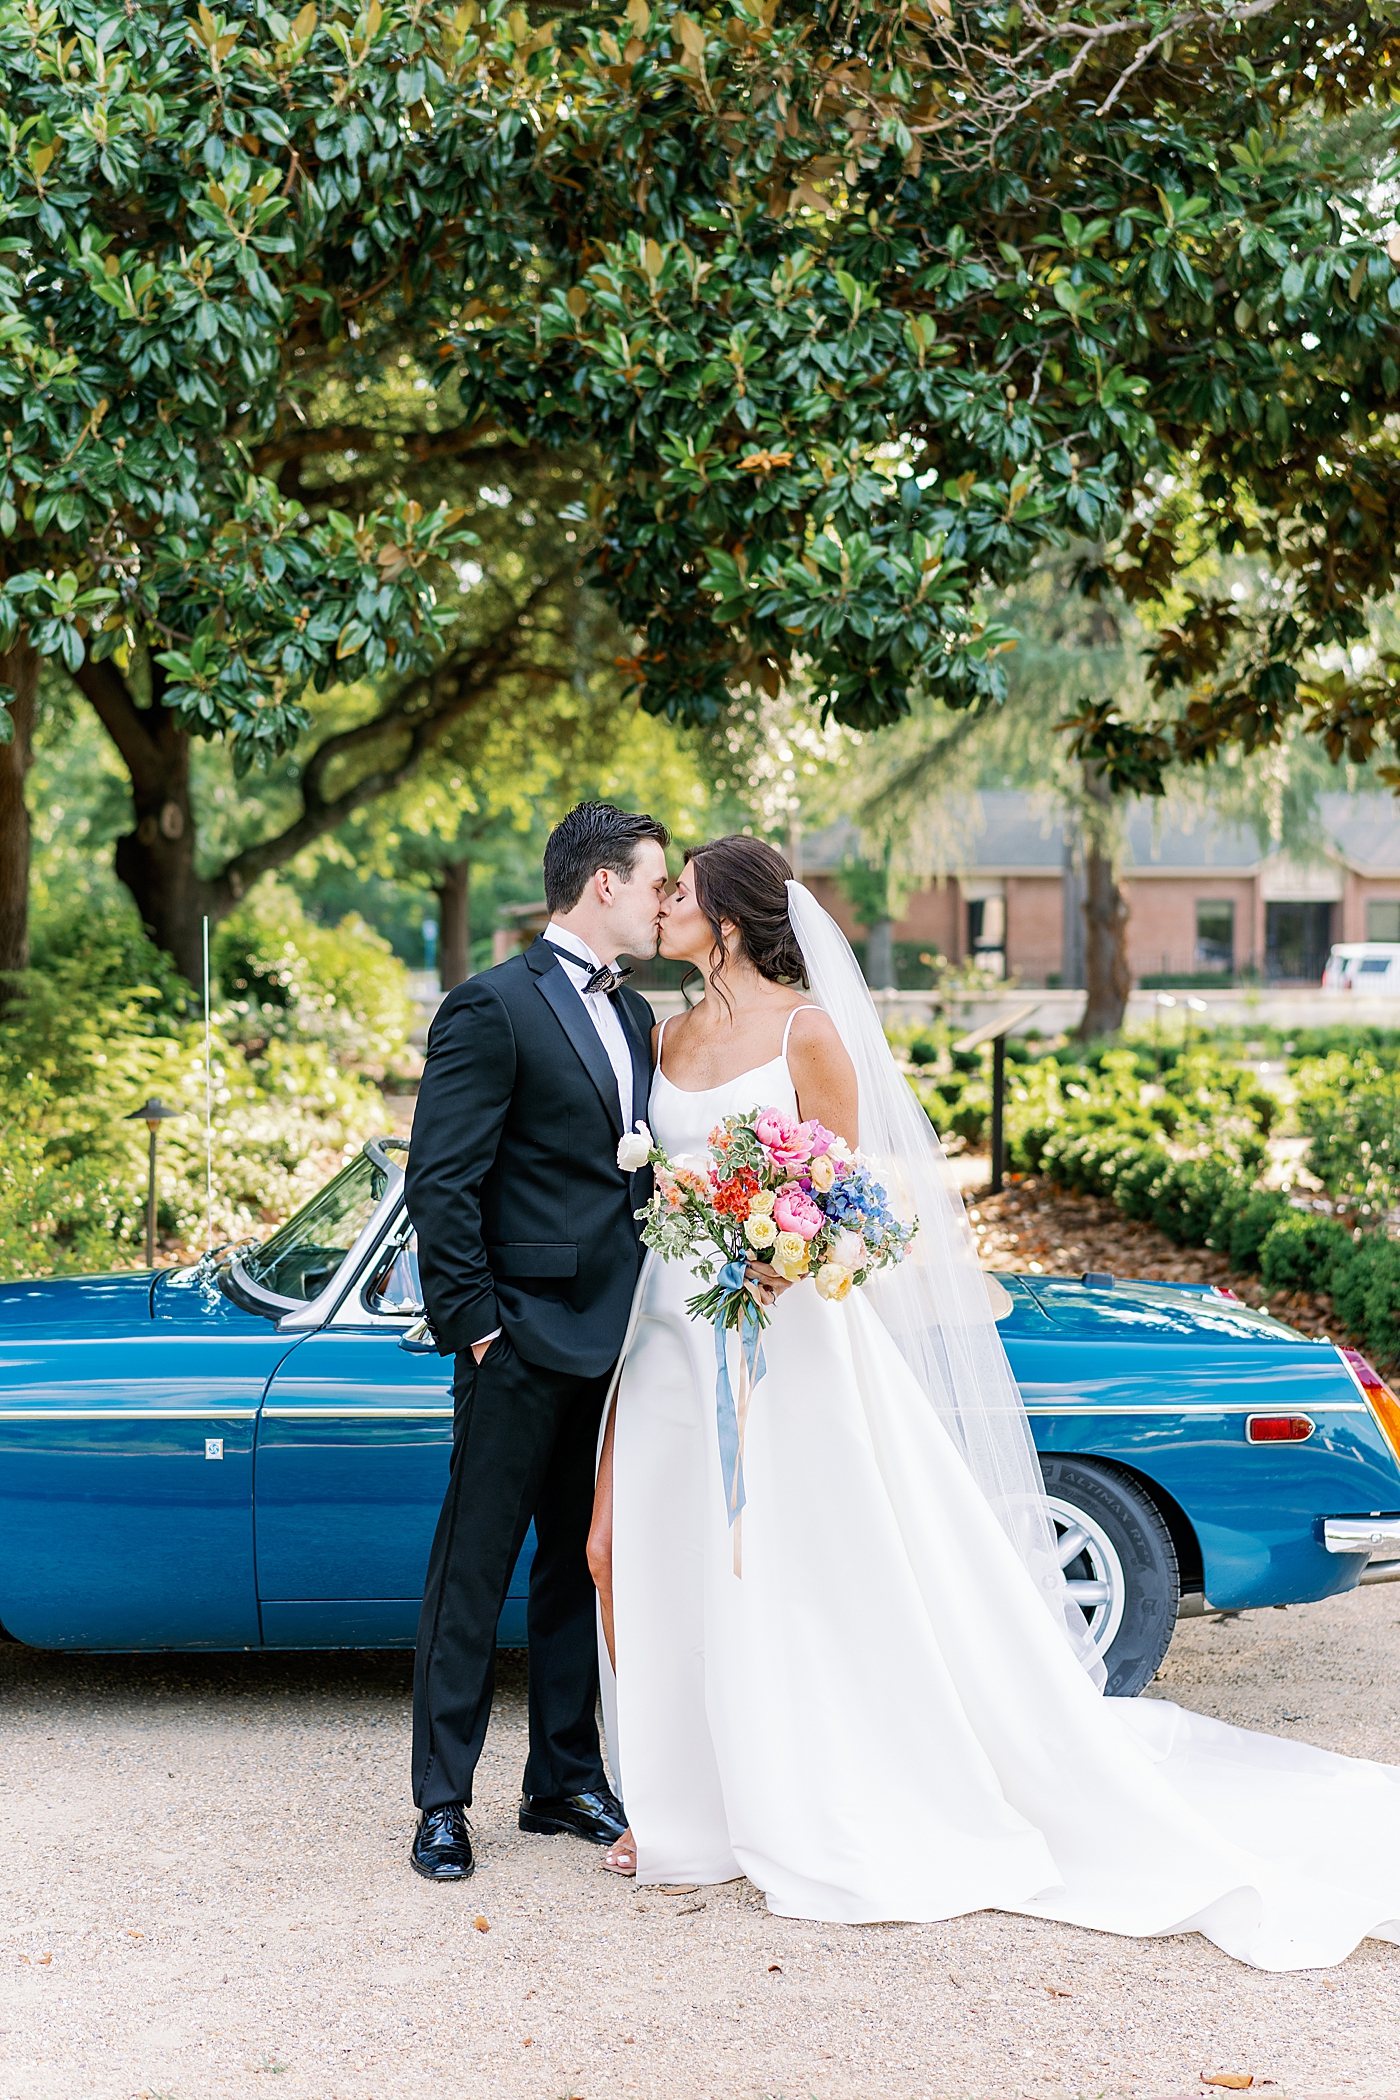 Bride and groom kissing by vintage car at Boyd Foundation Horticultural Center | Photo by Annie Laura Photo